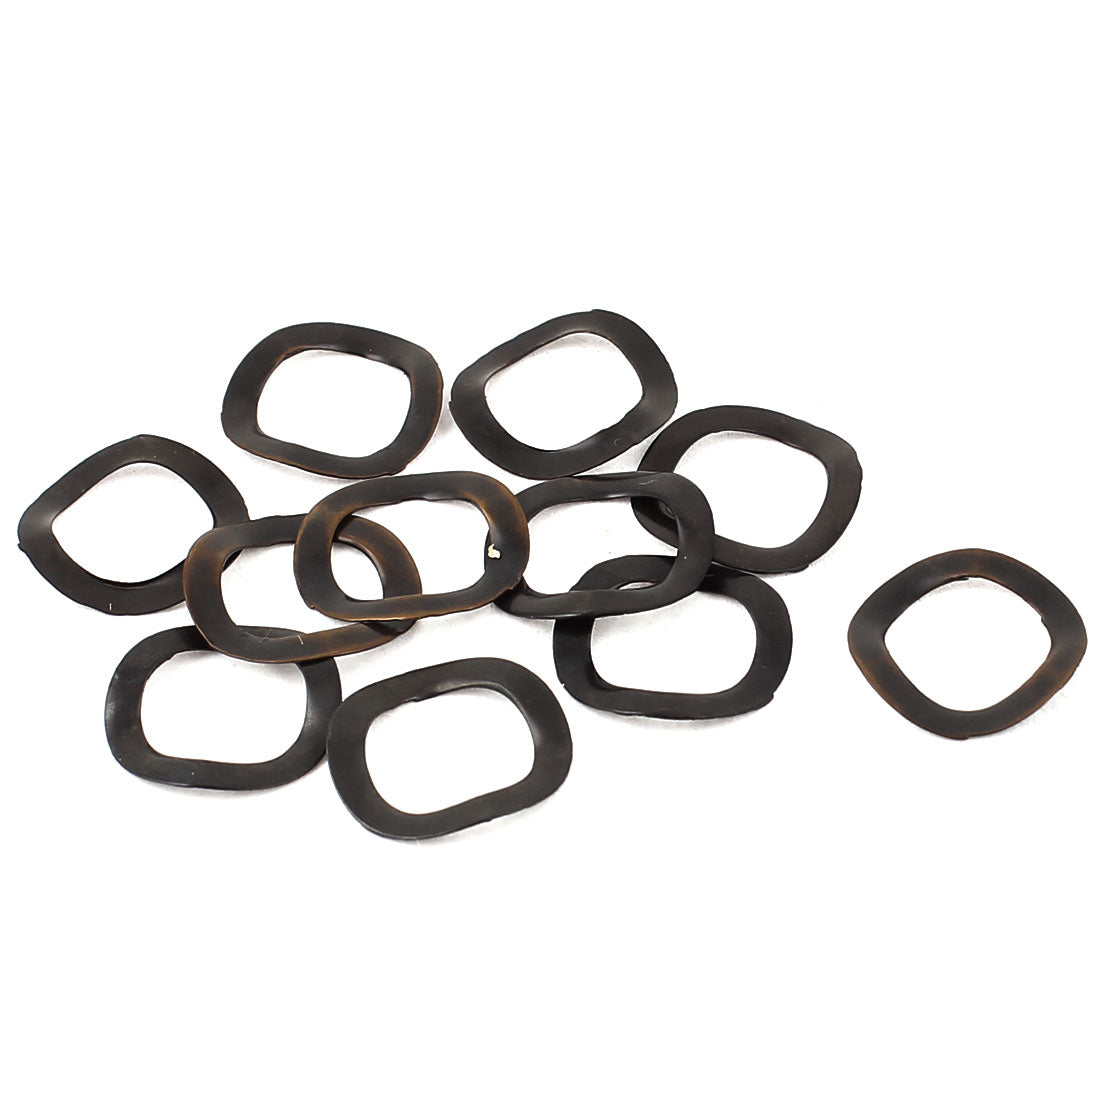 uxcell Uxcell 10 Pieces Black Metal Wave Crinkle Spring Washer 10mm x 15mm x 0.3mm